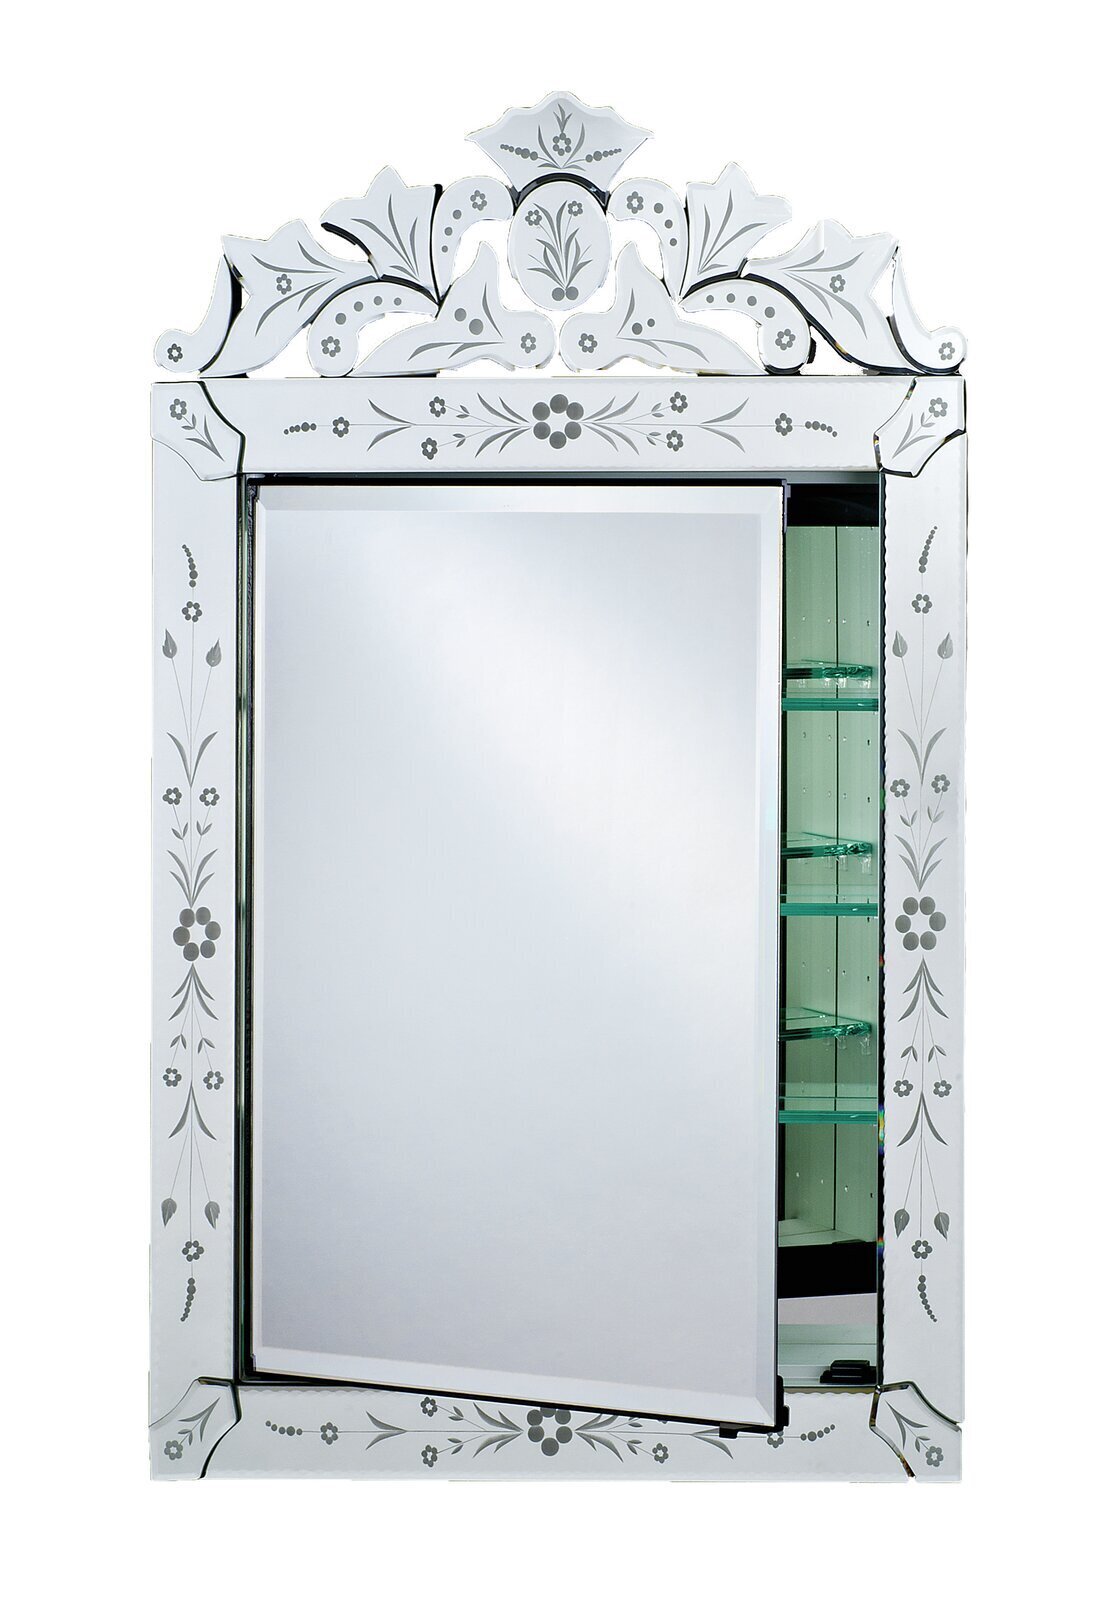 Recessed Medicine Cabinet with Floral Edged Mirror Frame